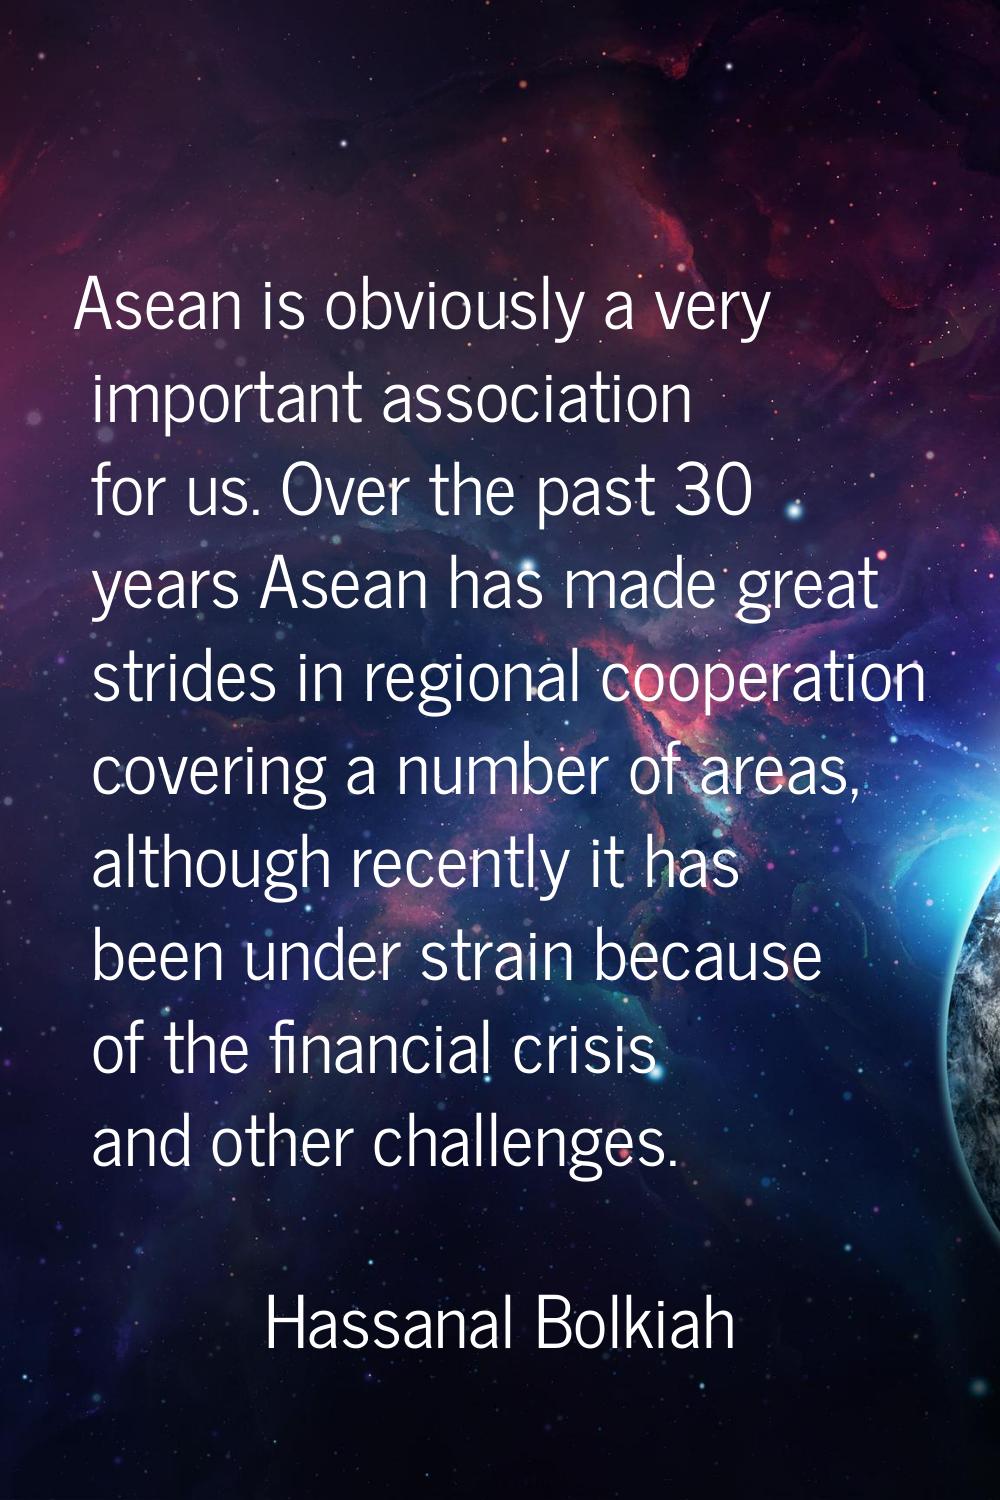 Asean is obviously a very important association for us. Over the past 30 years Asean has made great